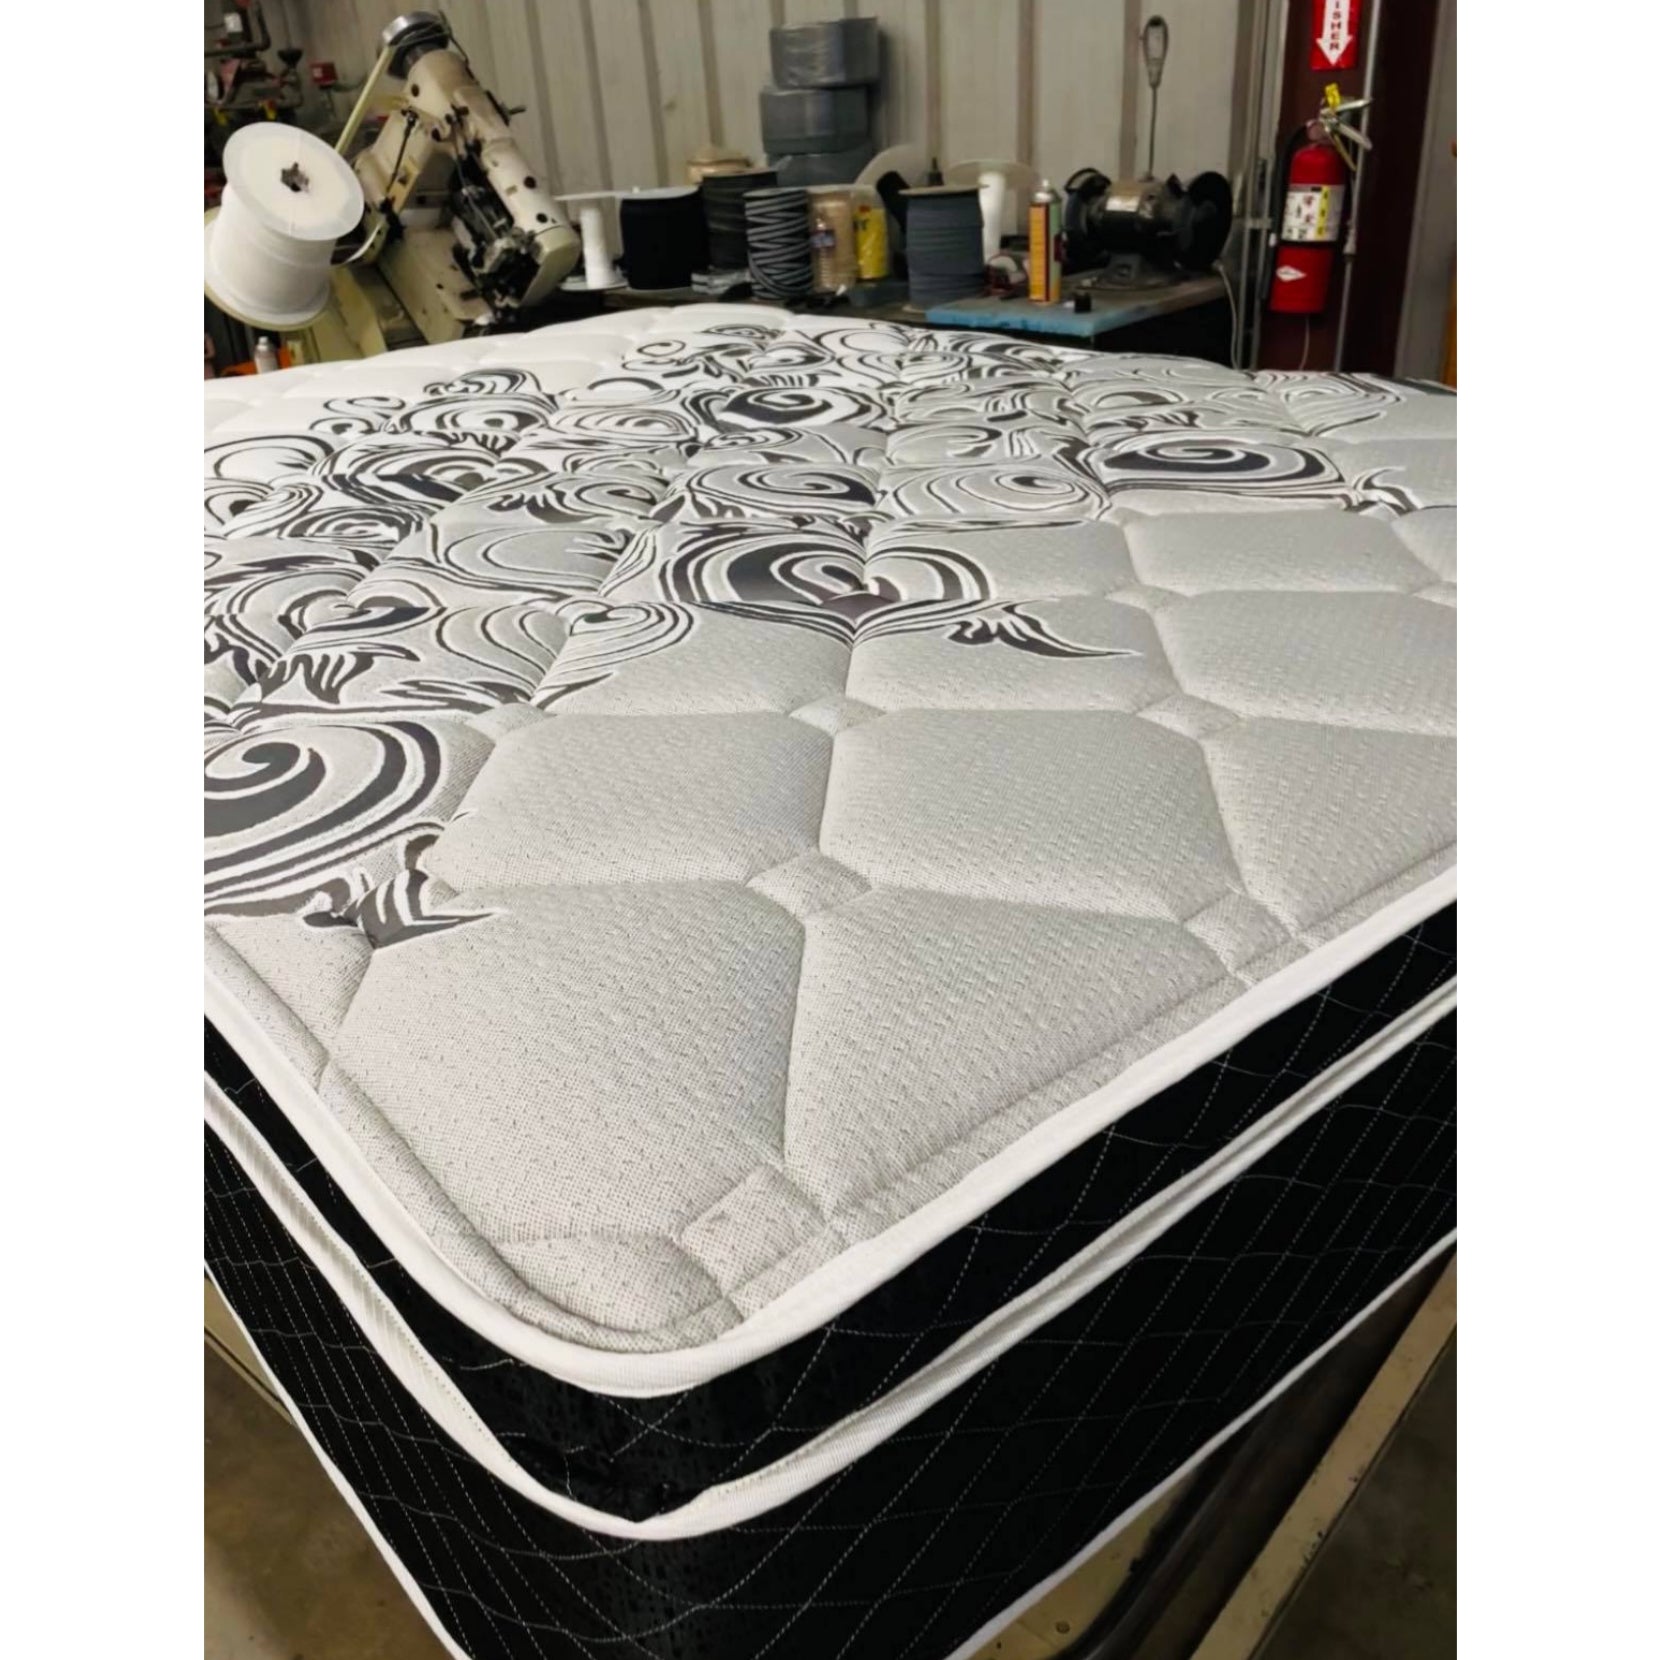 Vivians 13" Innerspring Mattress With Gray Quilt, Inside Of A Warehouse, Corner View, Zoomed In